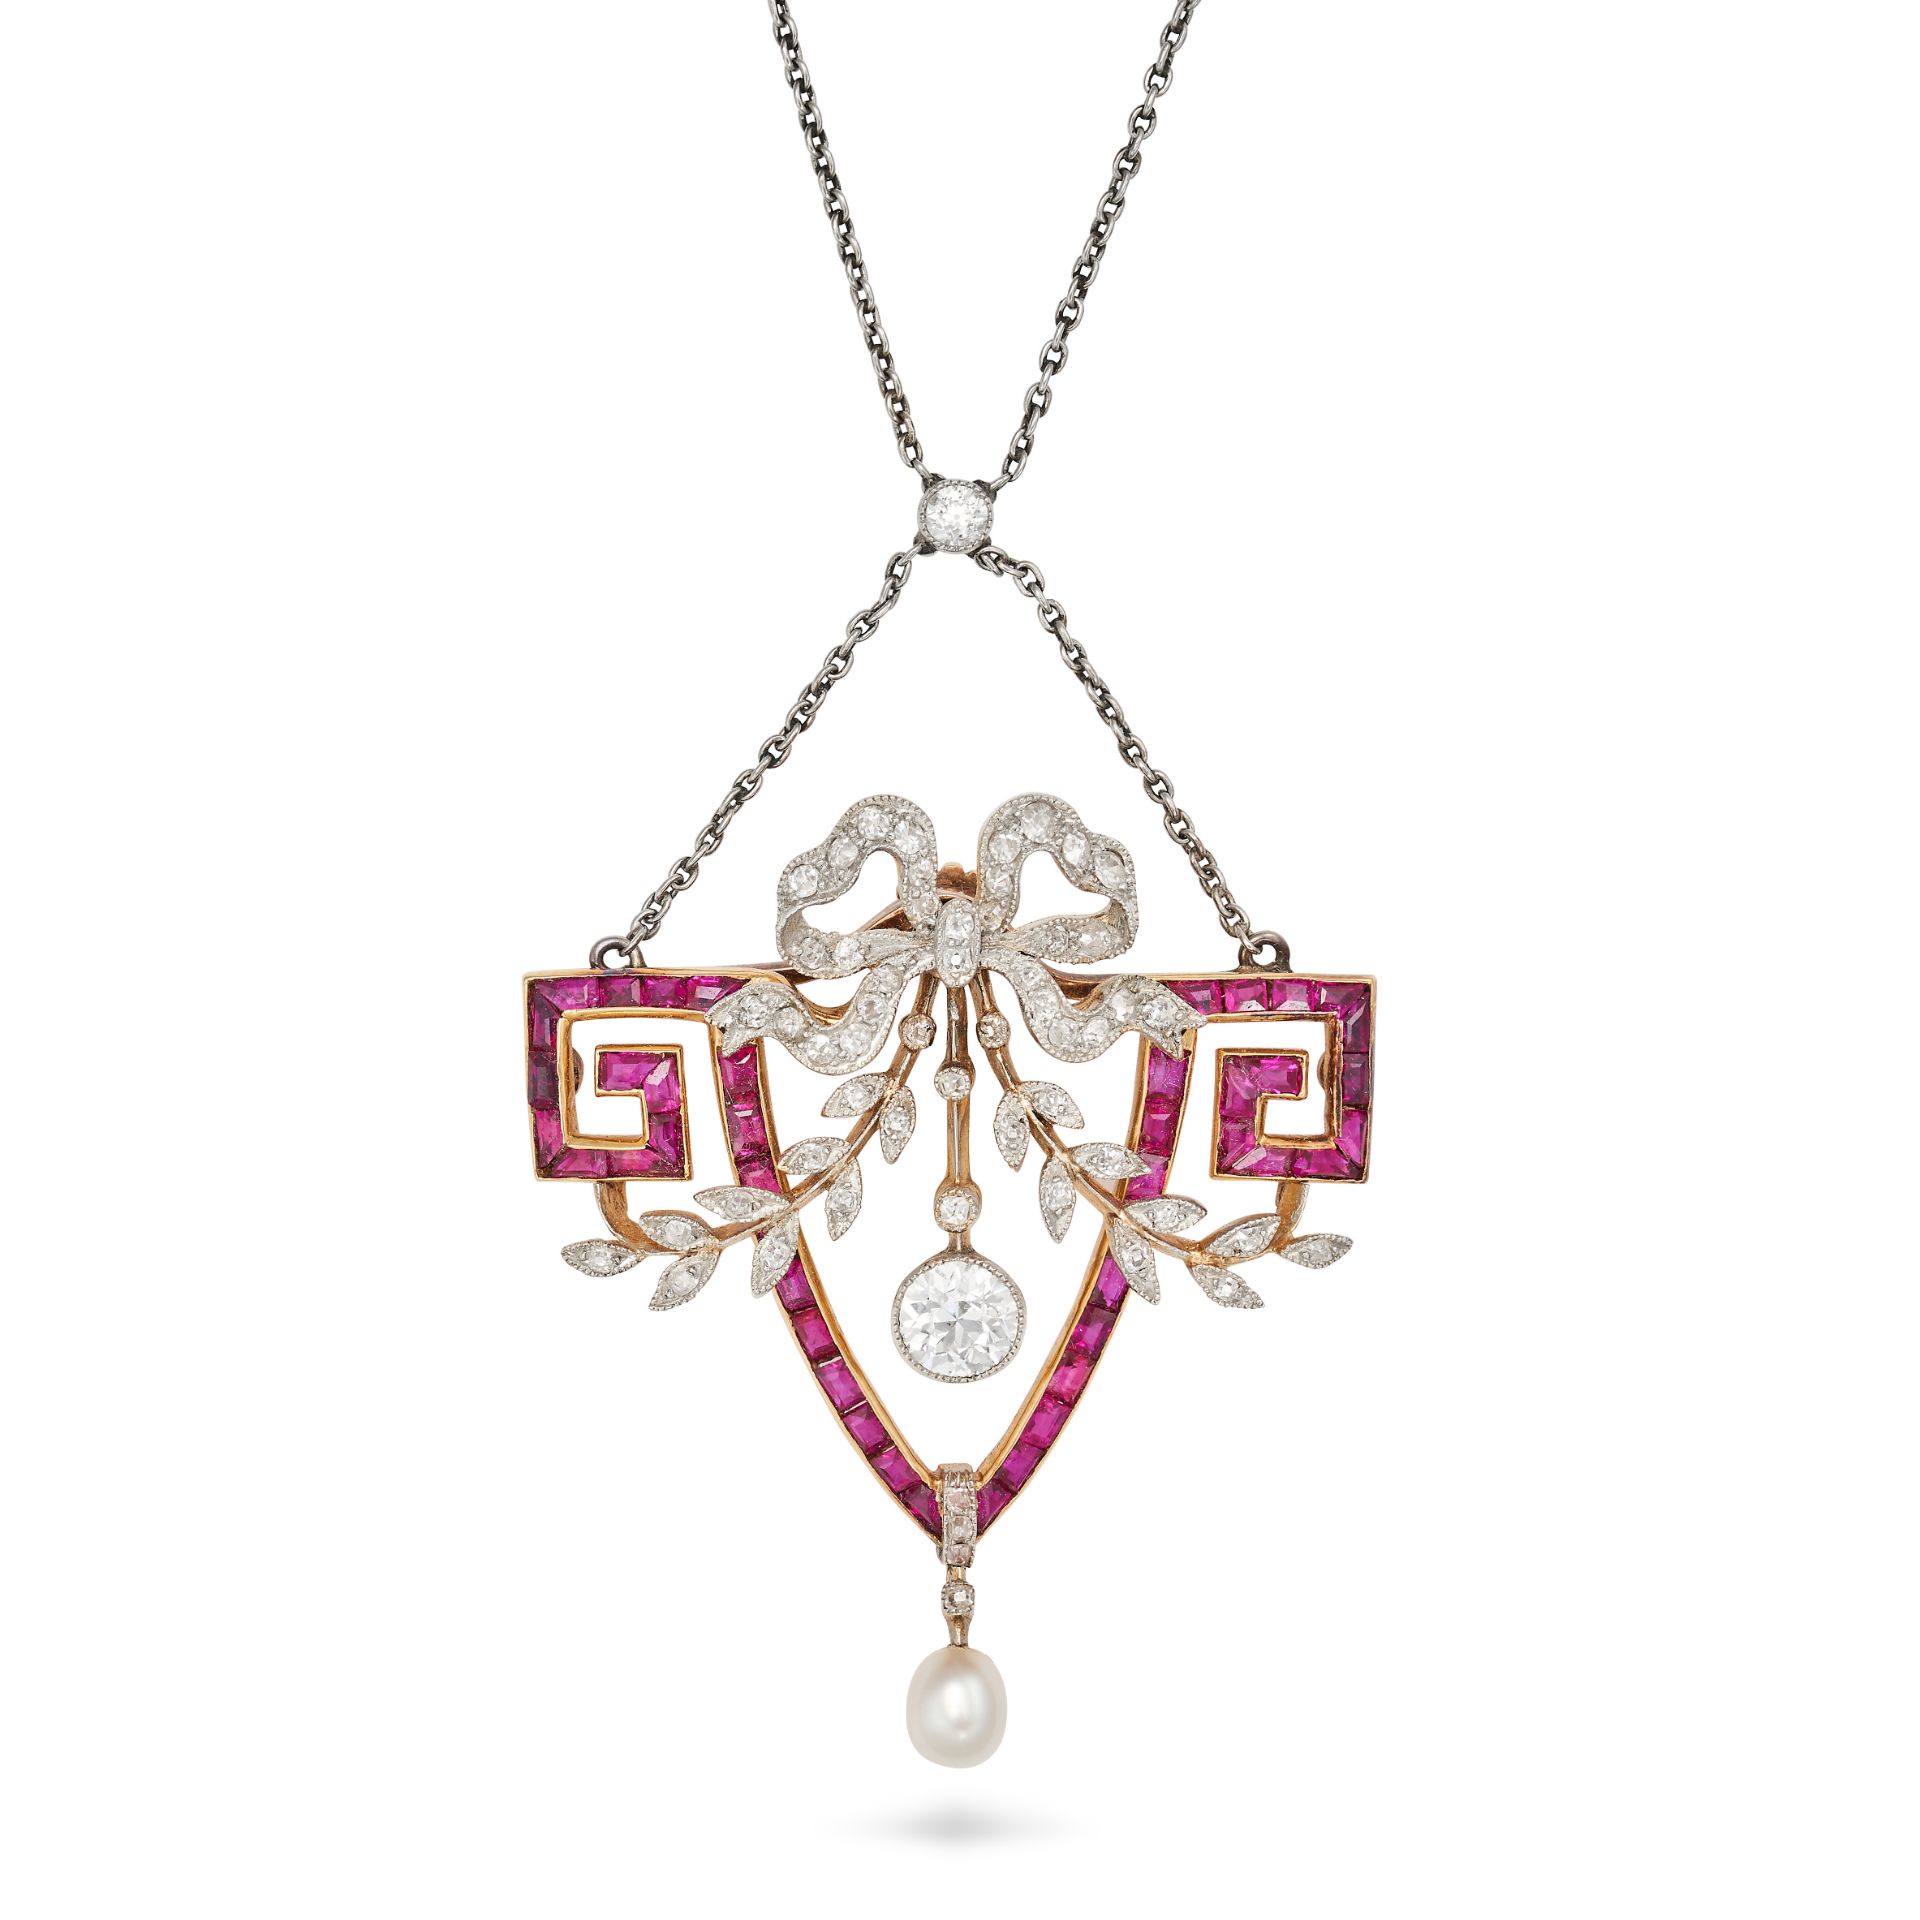 AN ANTIQUE BELLE EPOQUE DIAMOND, RUBY AND PEARL BROOCH / PENDANT NECKLACE in yellow gold and plat...